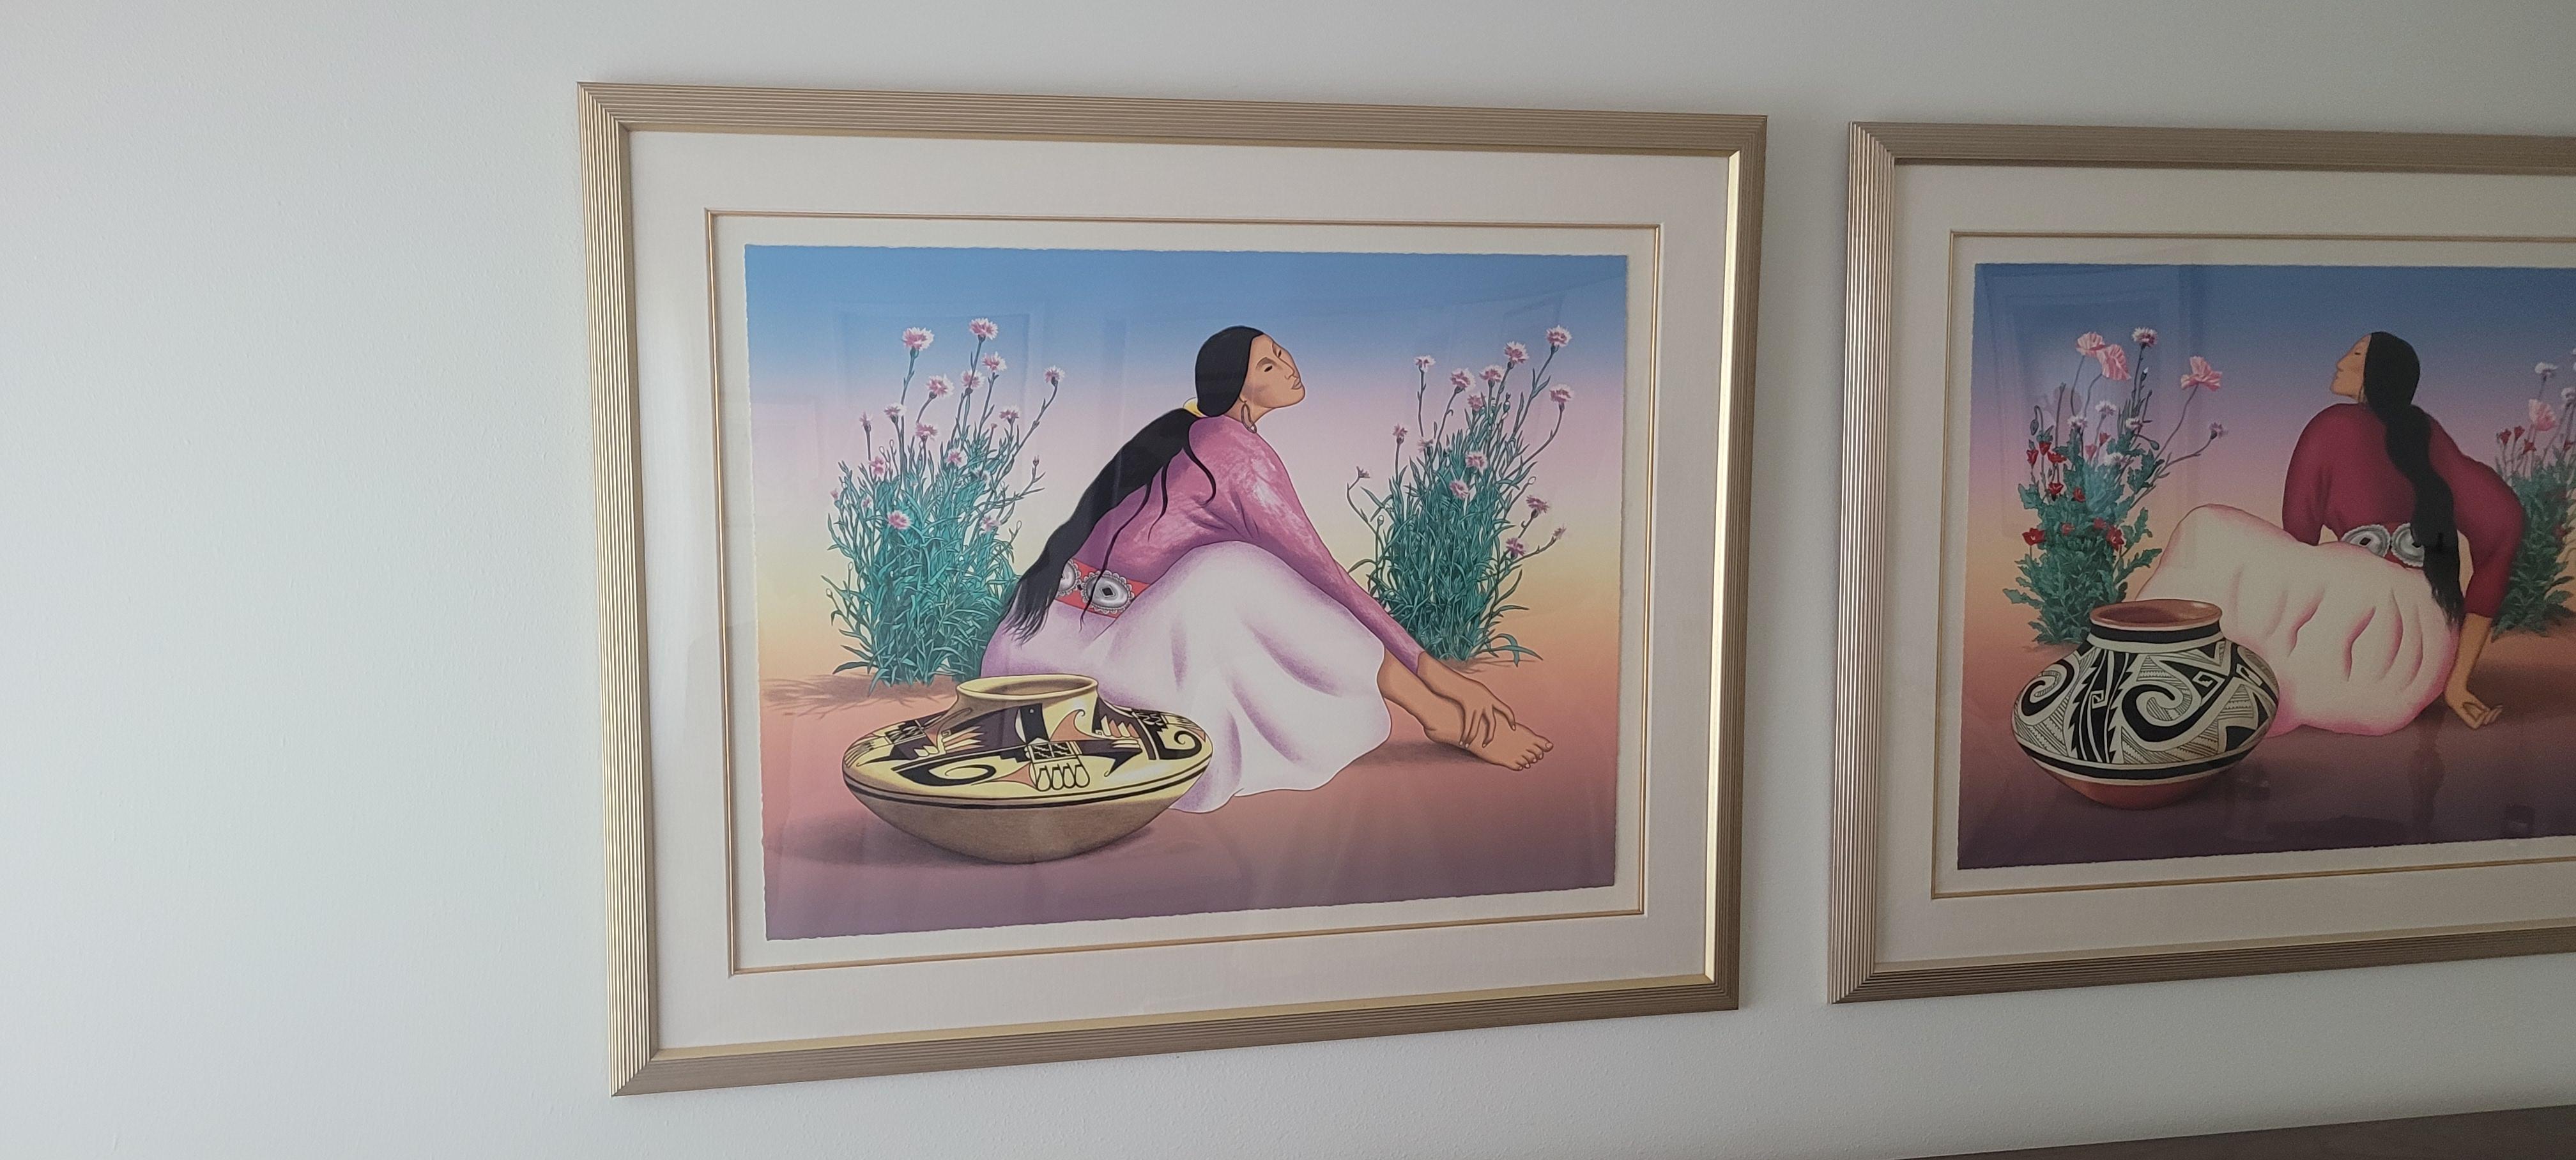 Esperanza and Esperanza II were both begun in August 1994.  Esperanza I was signed Feb 12, 1995 and Esperanza II signed Sept 24,  1995. Esperanza I is a 38 color original lithograph drawn on mylars and plate by the artist in his studio in Taos, New